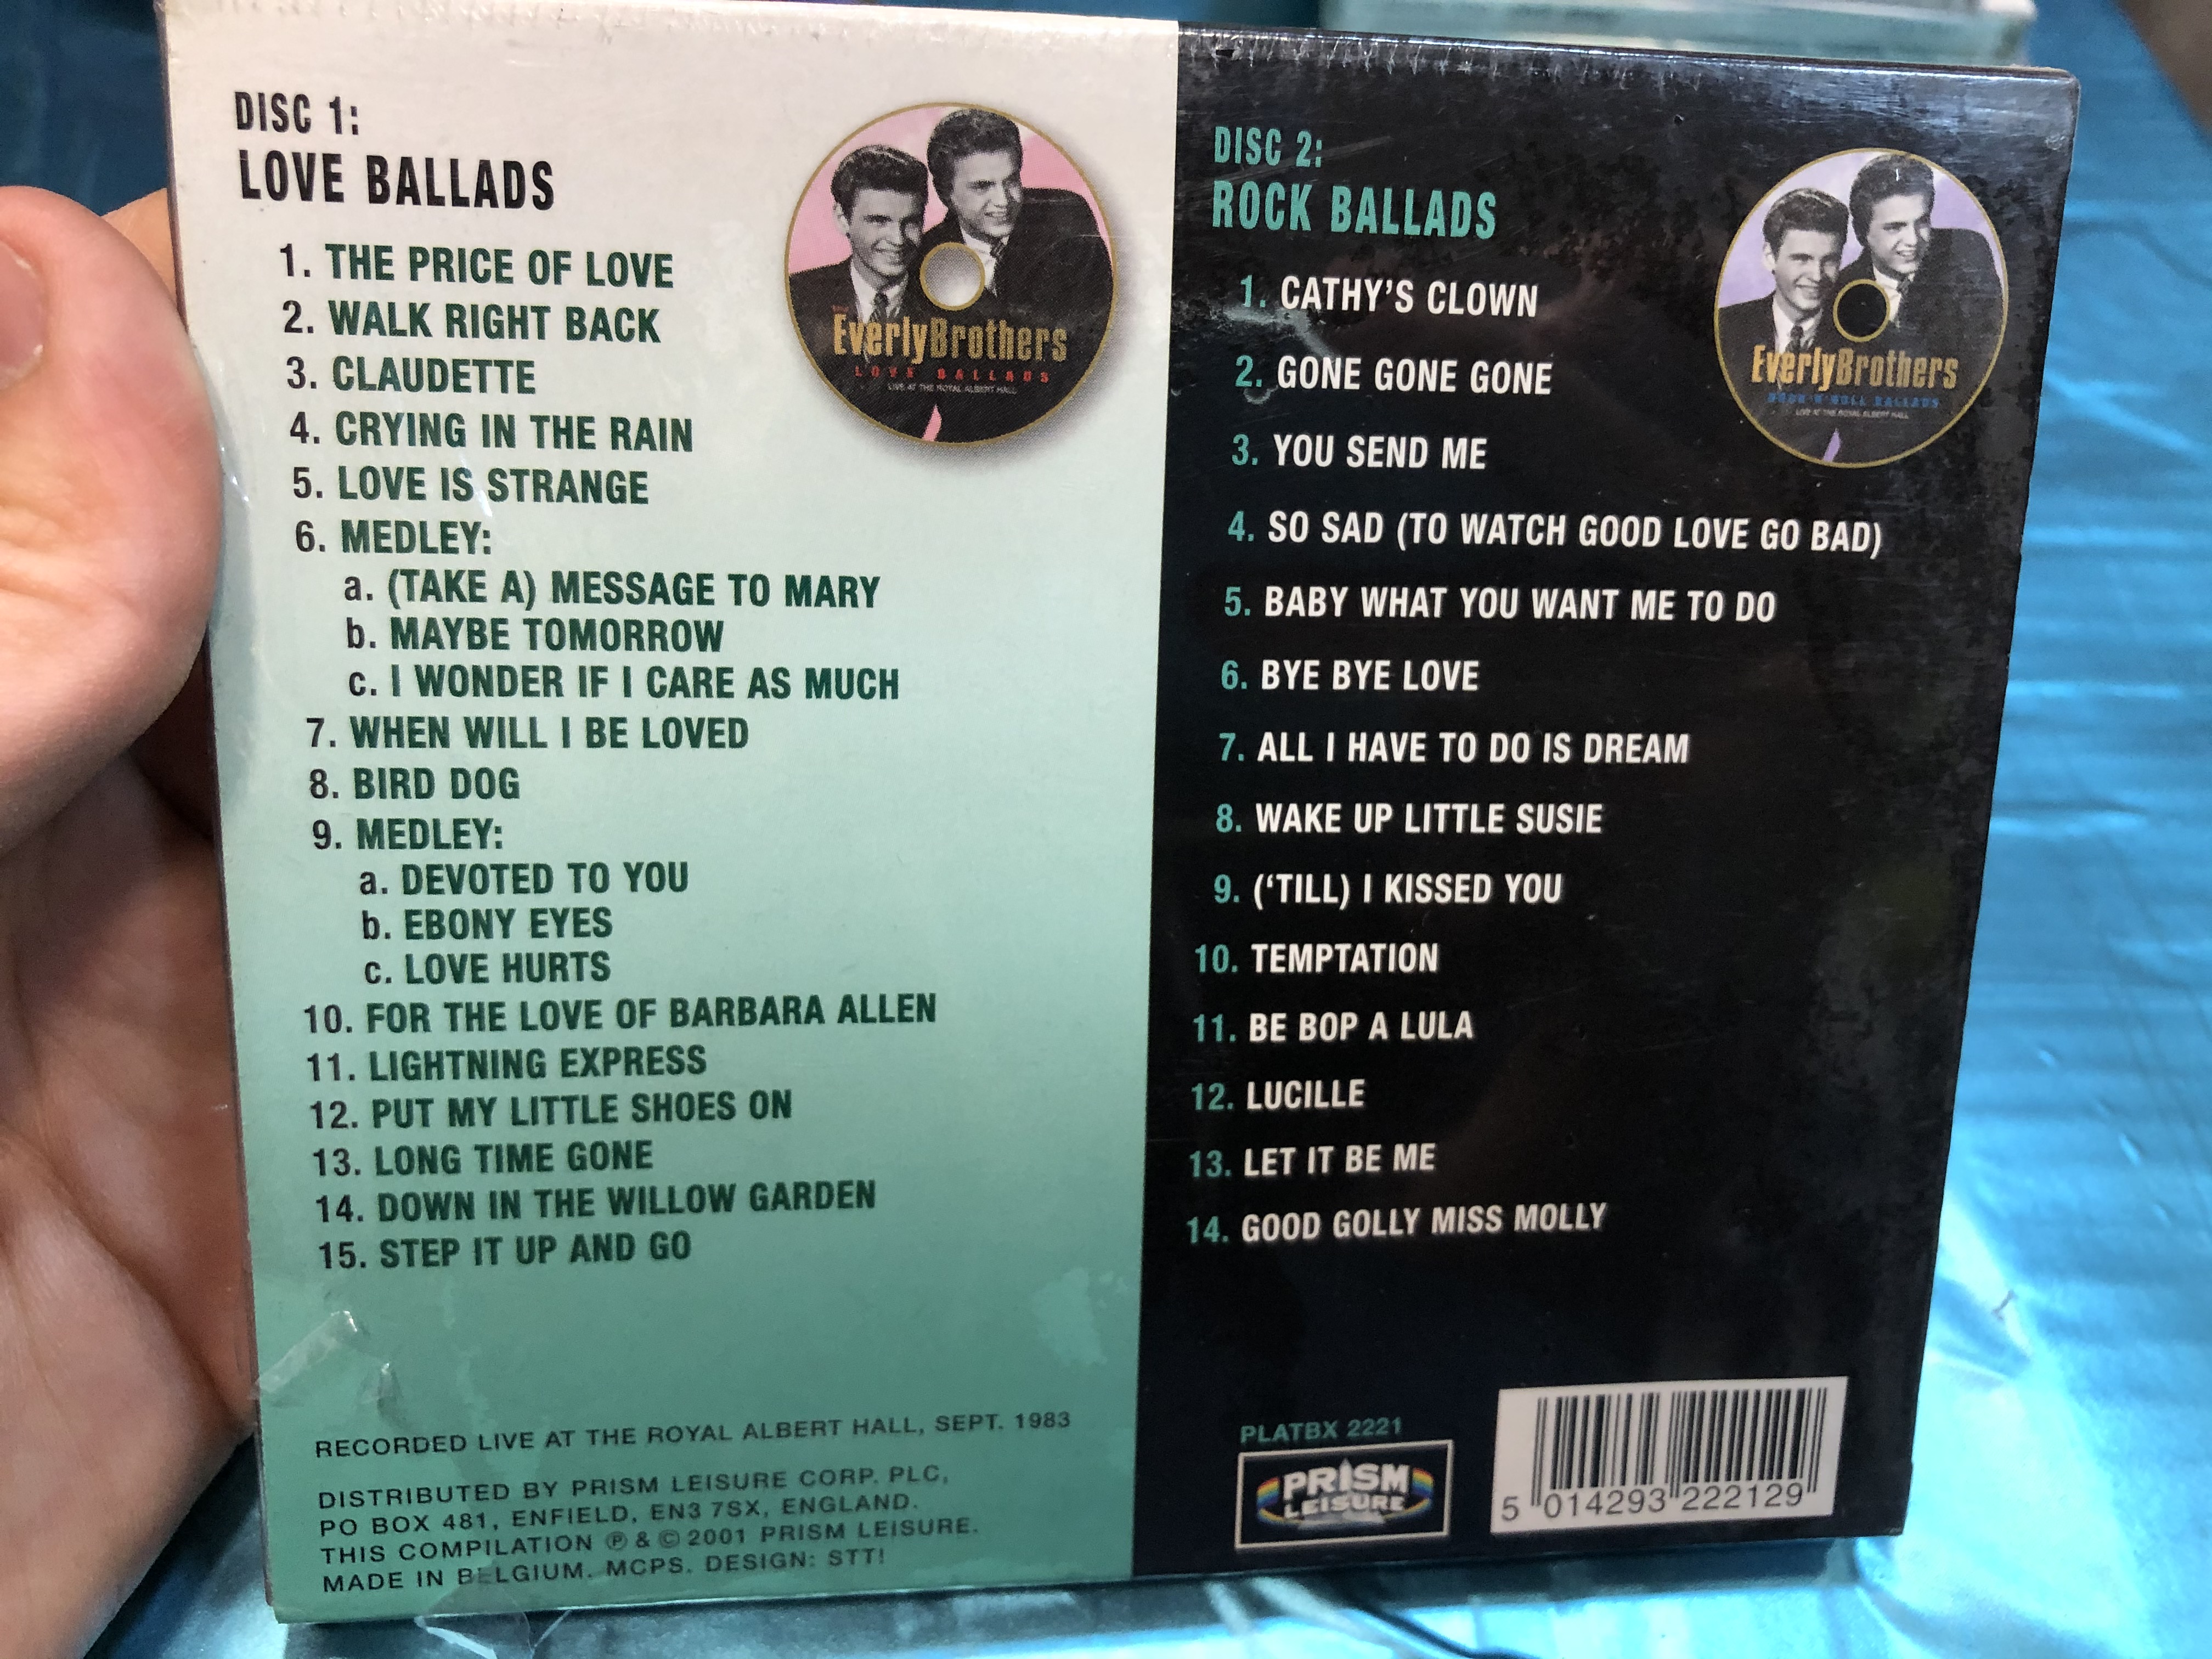 the-everly-brothers-29-golden-greats-performed-at-royal-albert-hall-prism-2x-audio-cd-2001-platbx-2221-3-.jpg